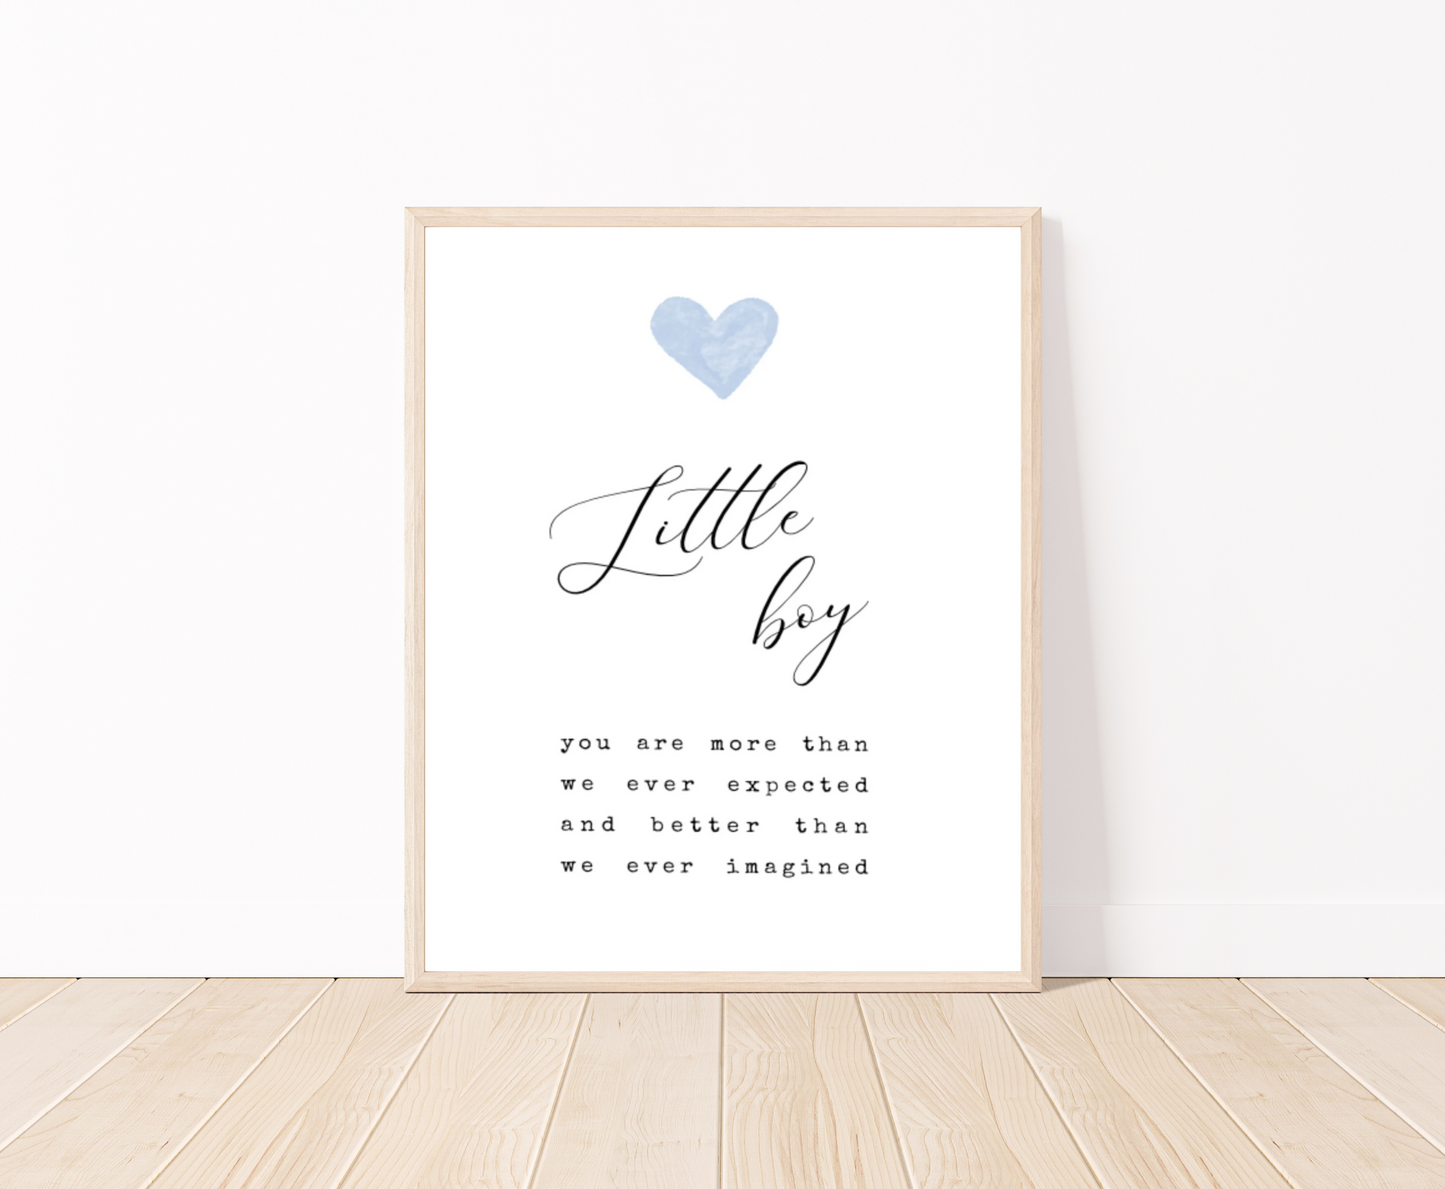 A digital poster showing a blue heart on top with a piece of writing below saying: Little boy, you are more than we ever expected, and better we ever imagined. 